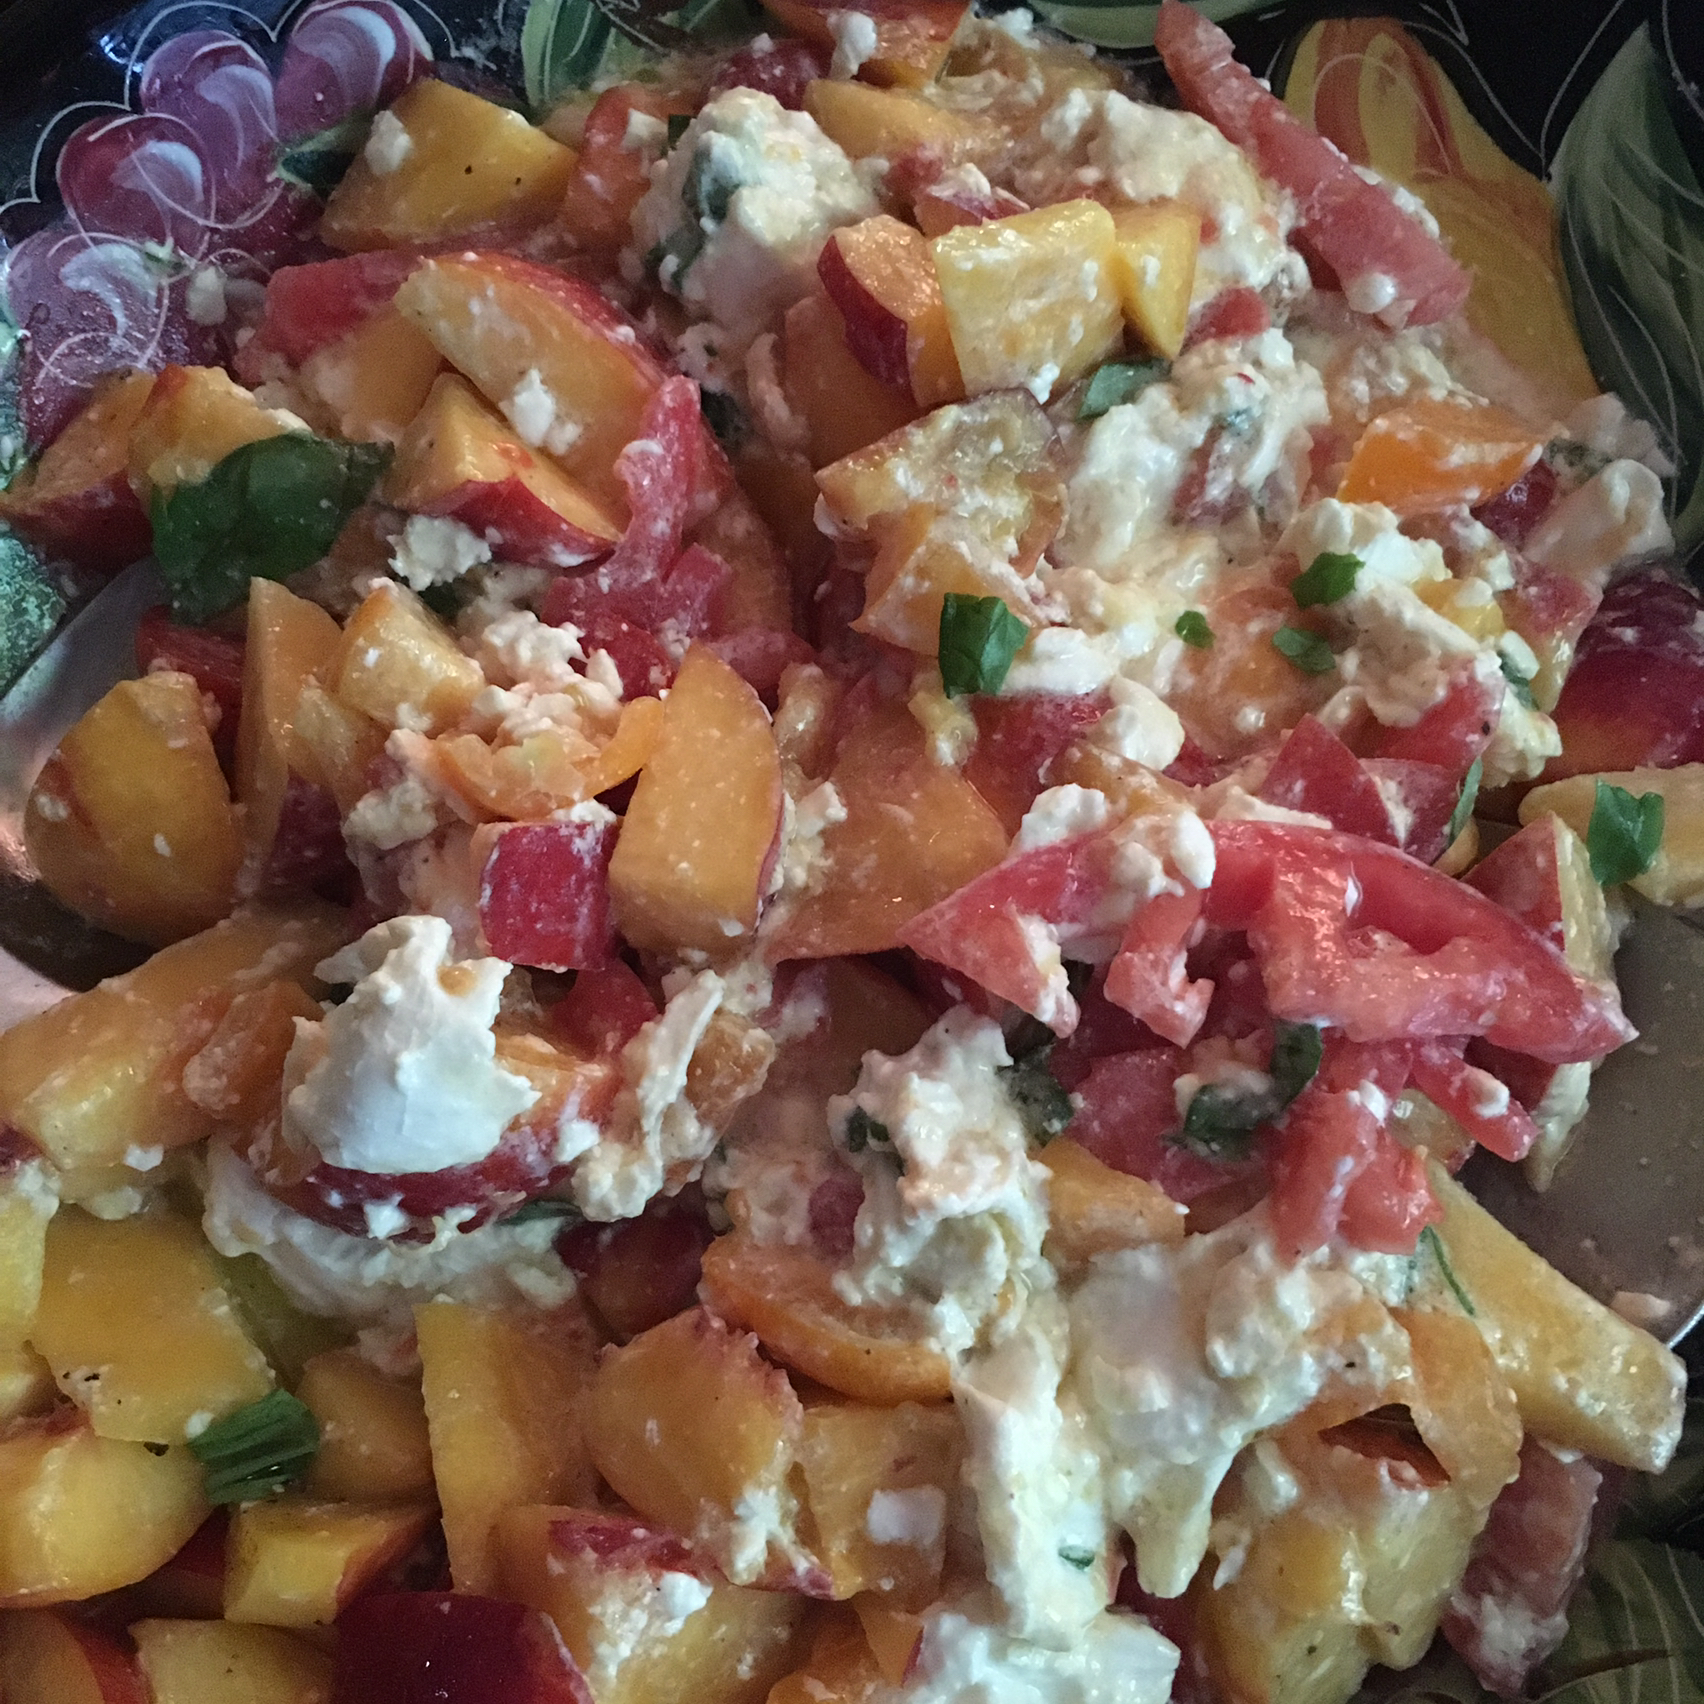 Summer Salad with Burrata, Tomatoes, and Nectarines